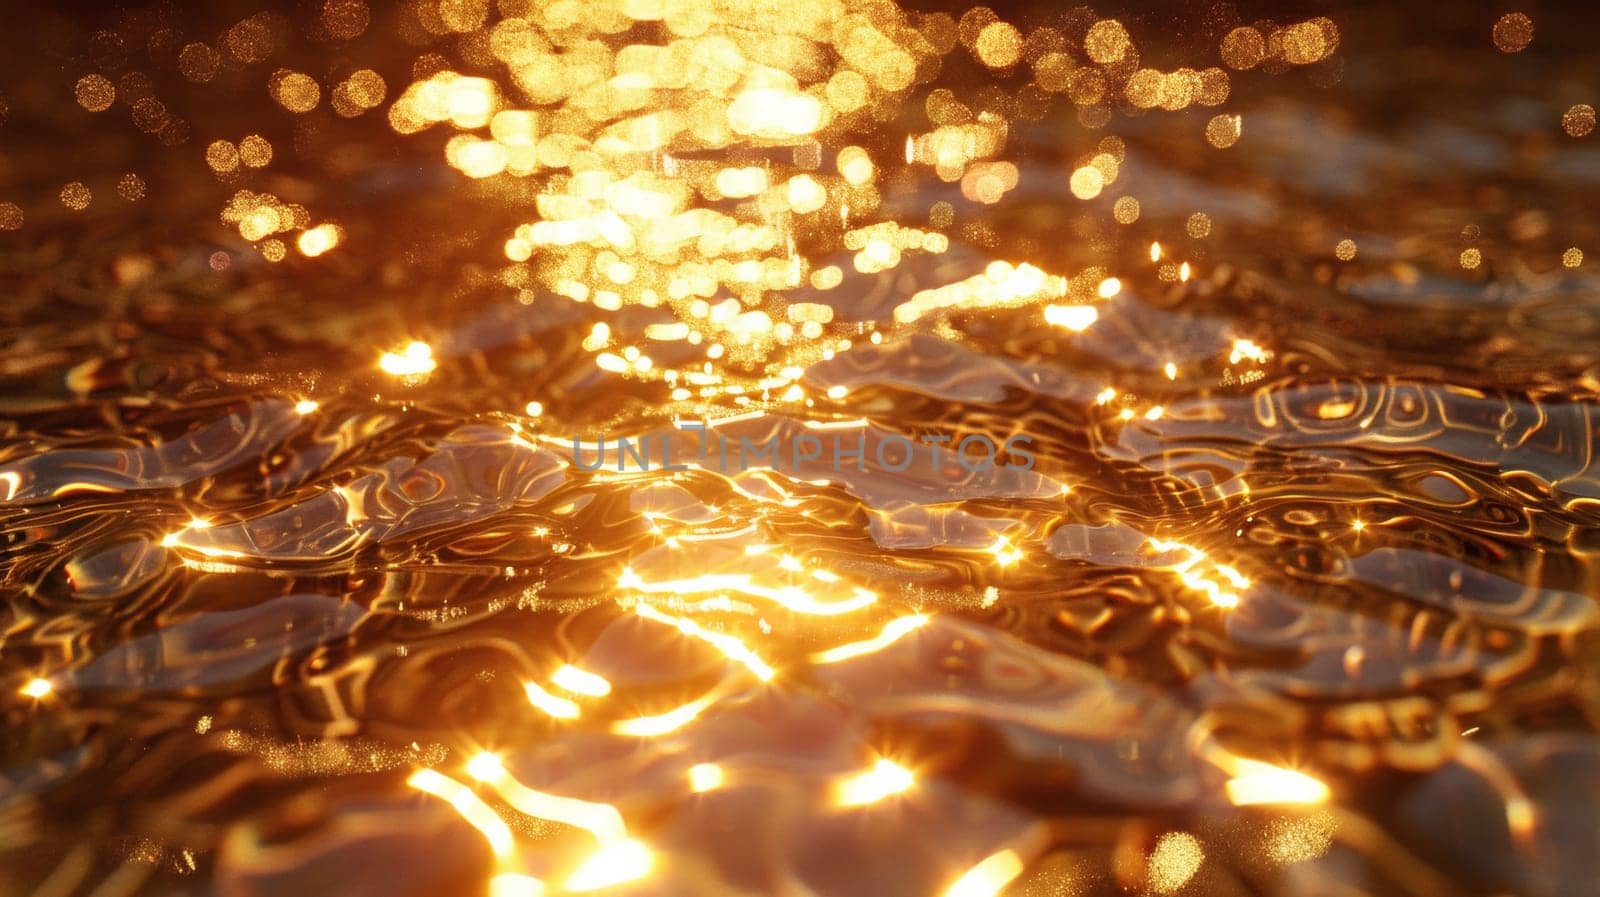 A close up of a shiny surface with some lights shining on it